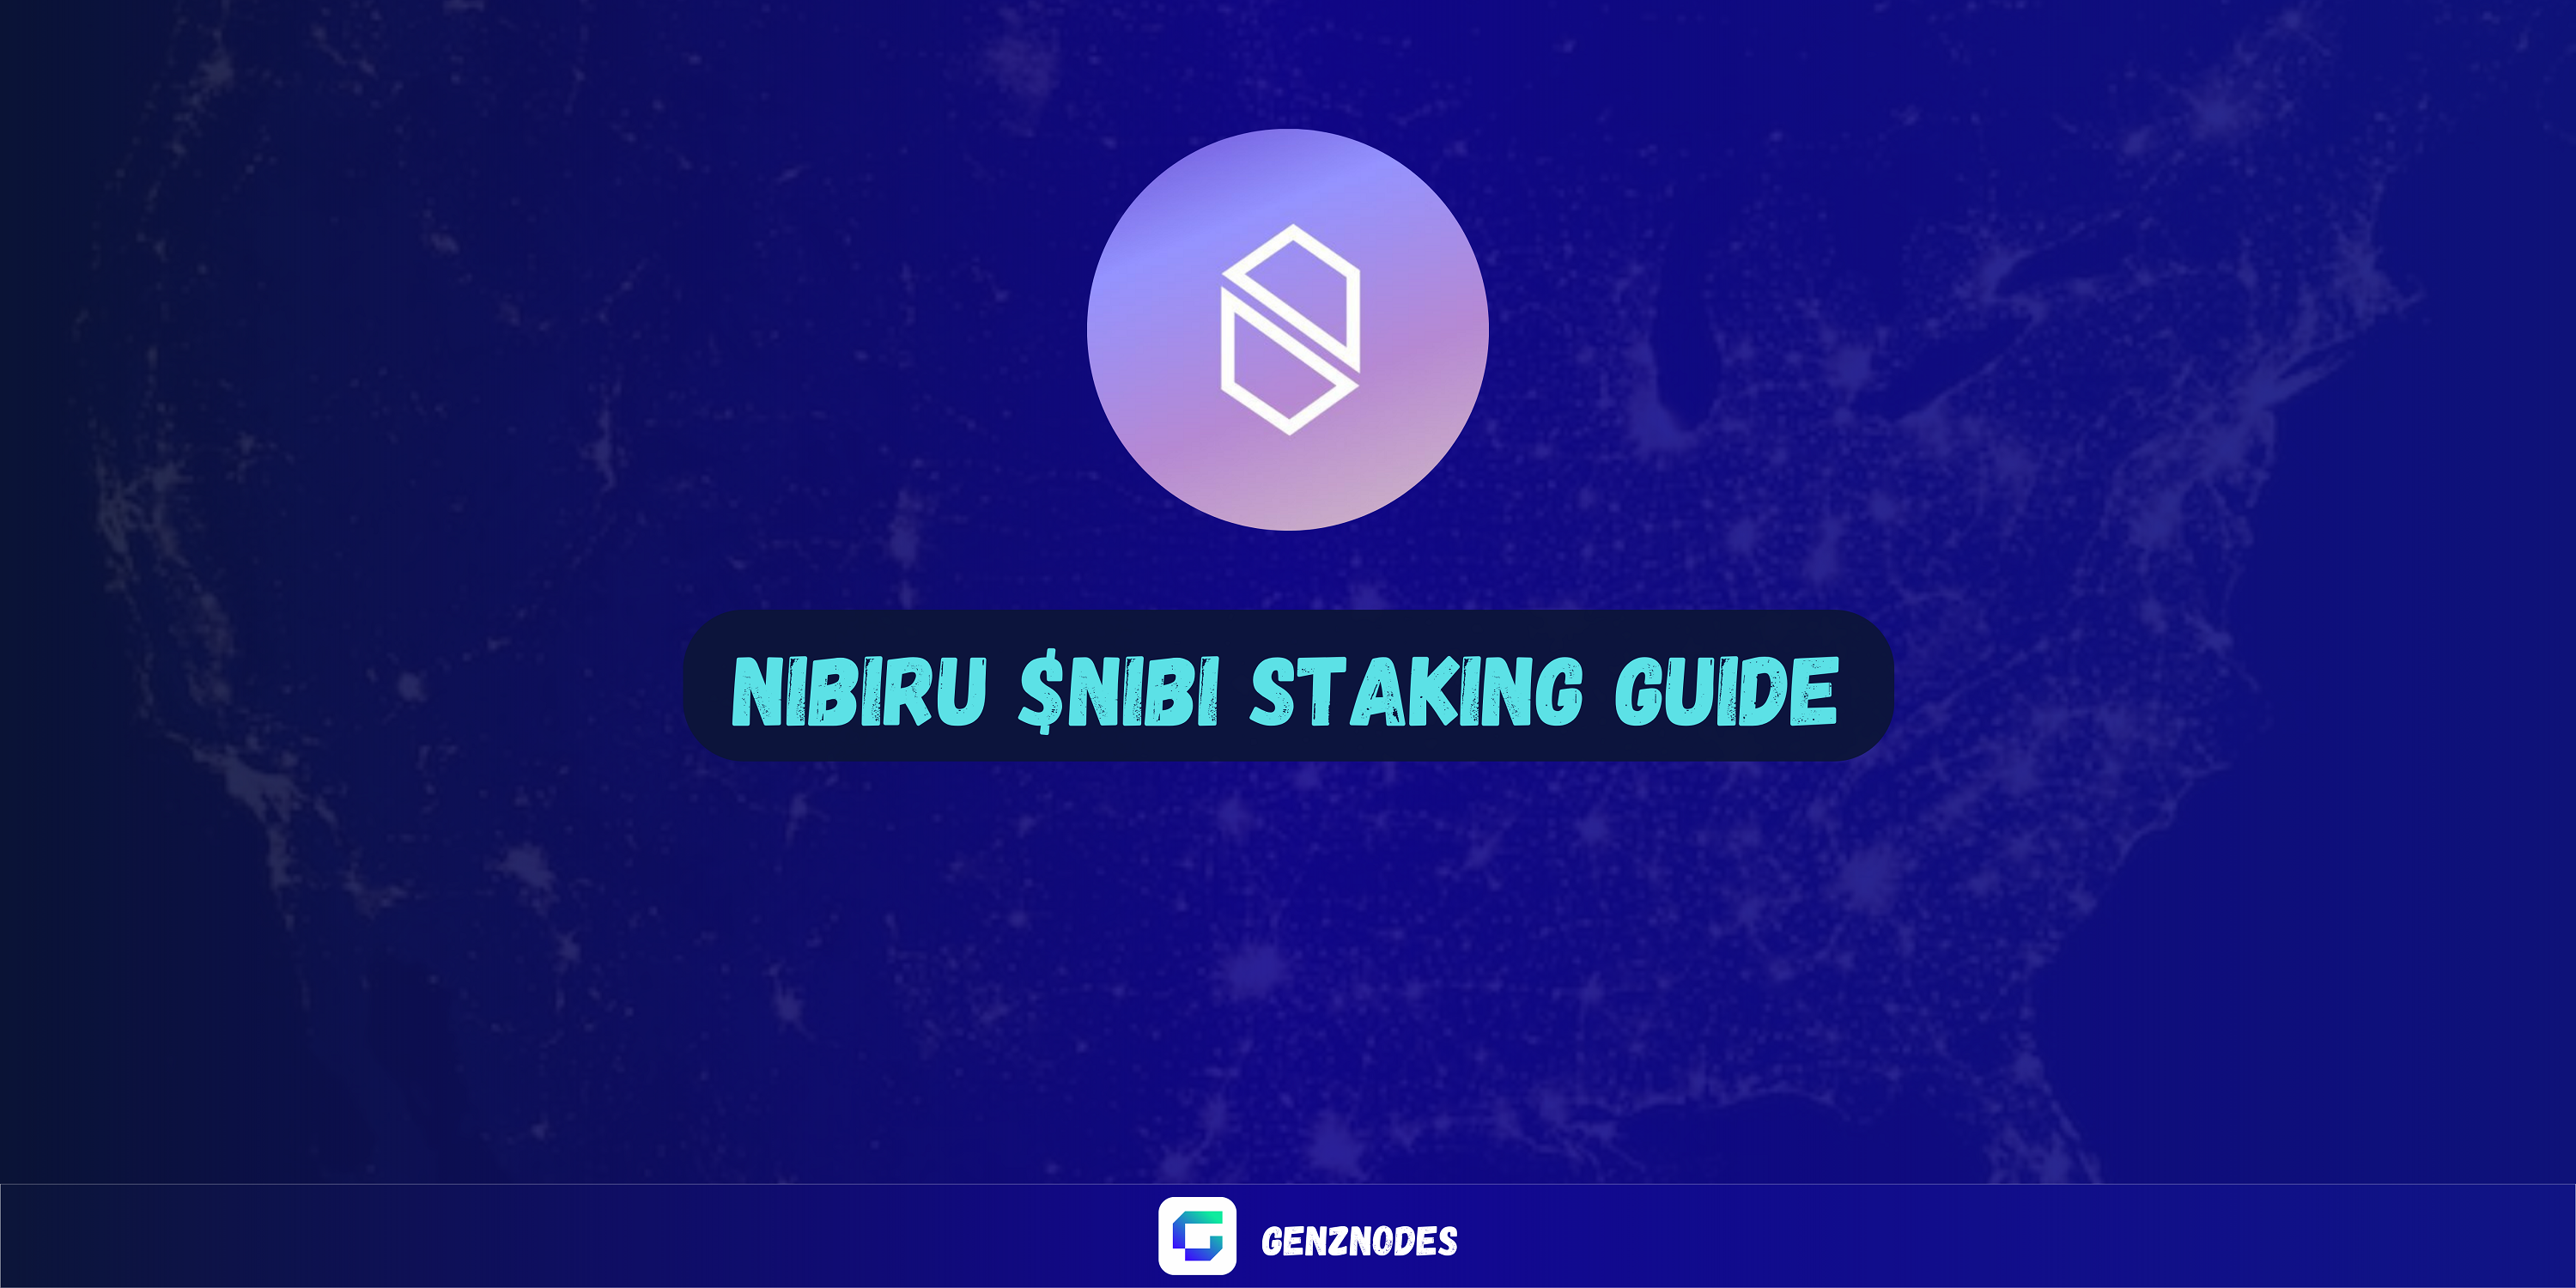 Guidelines for delegating $NIBI. Participate to help secure the network, become a governance member, and earn staking rewards.